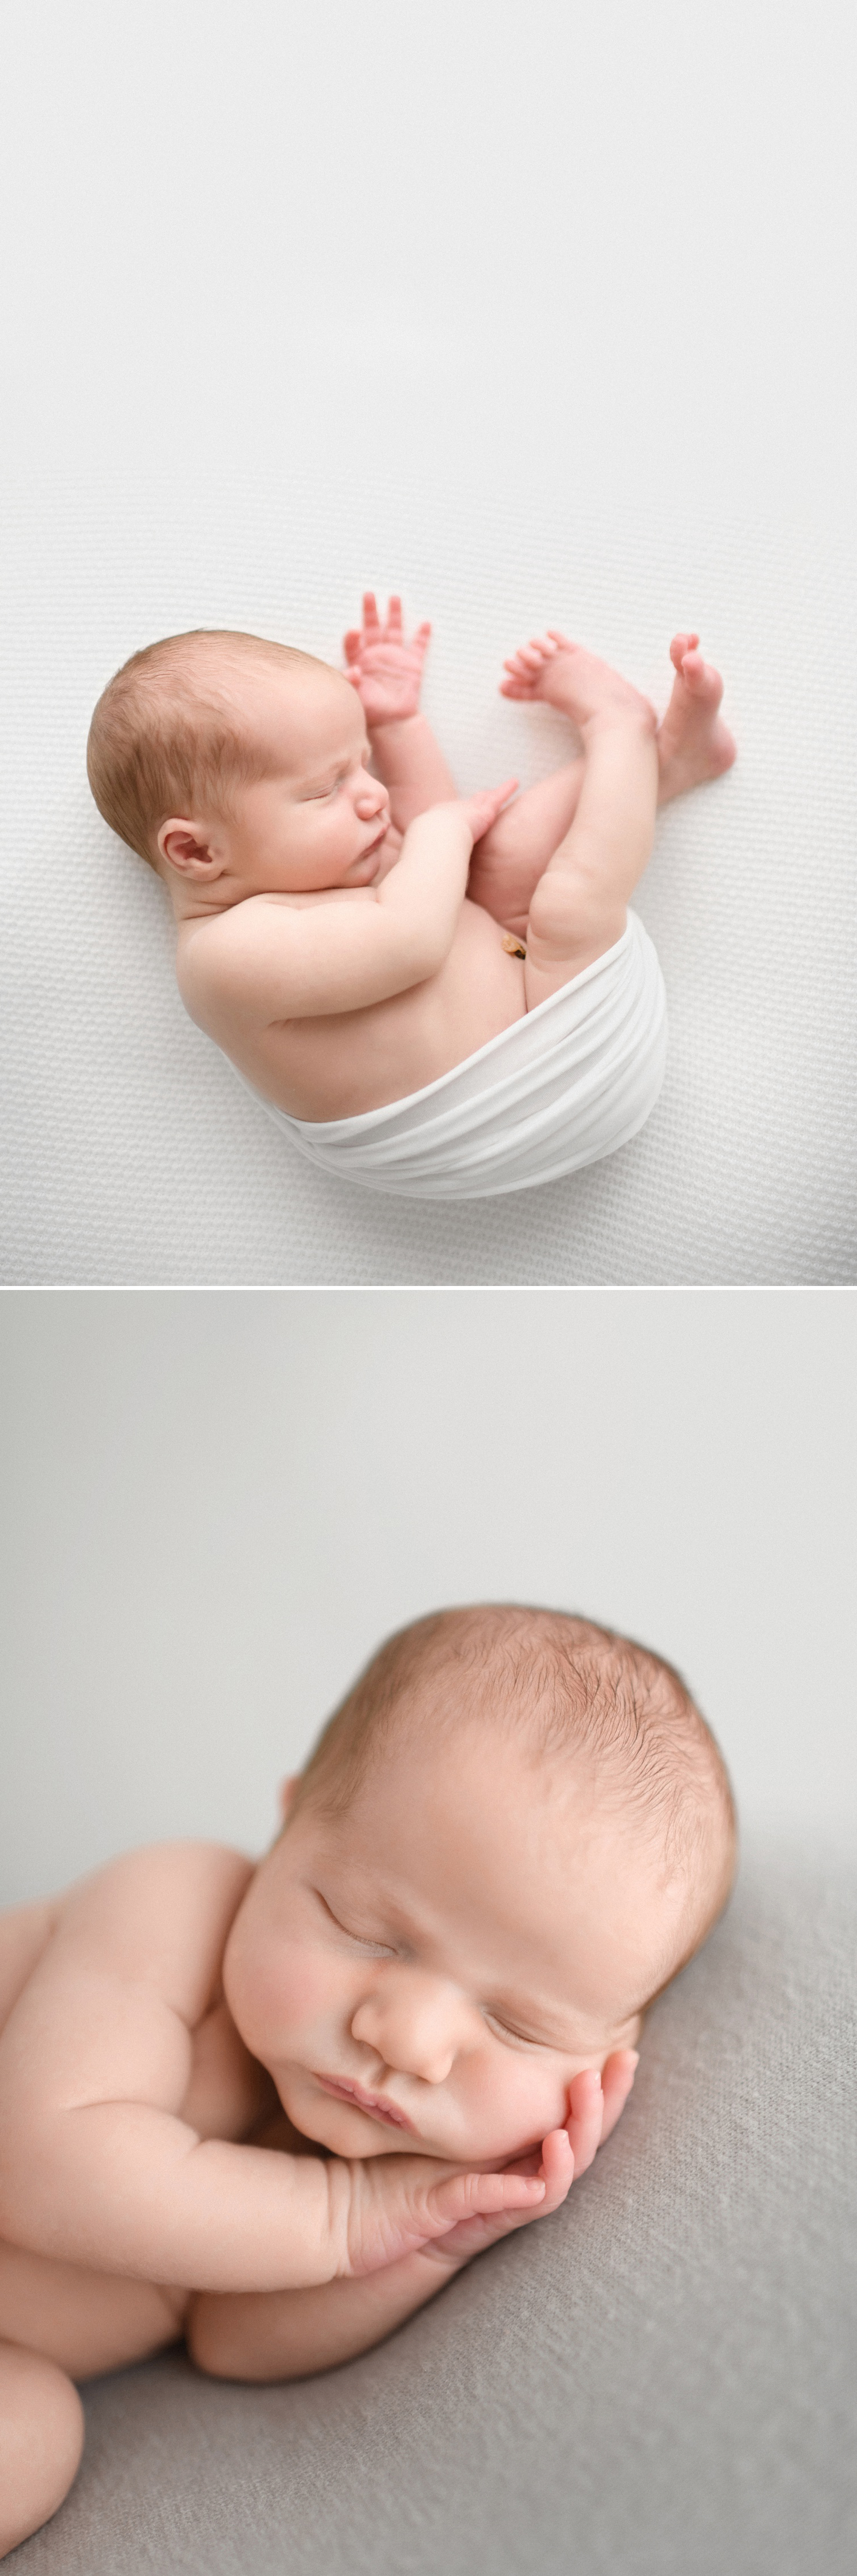 is studio or natural light best for photographing newborns